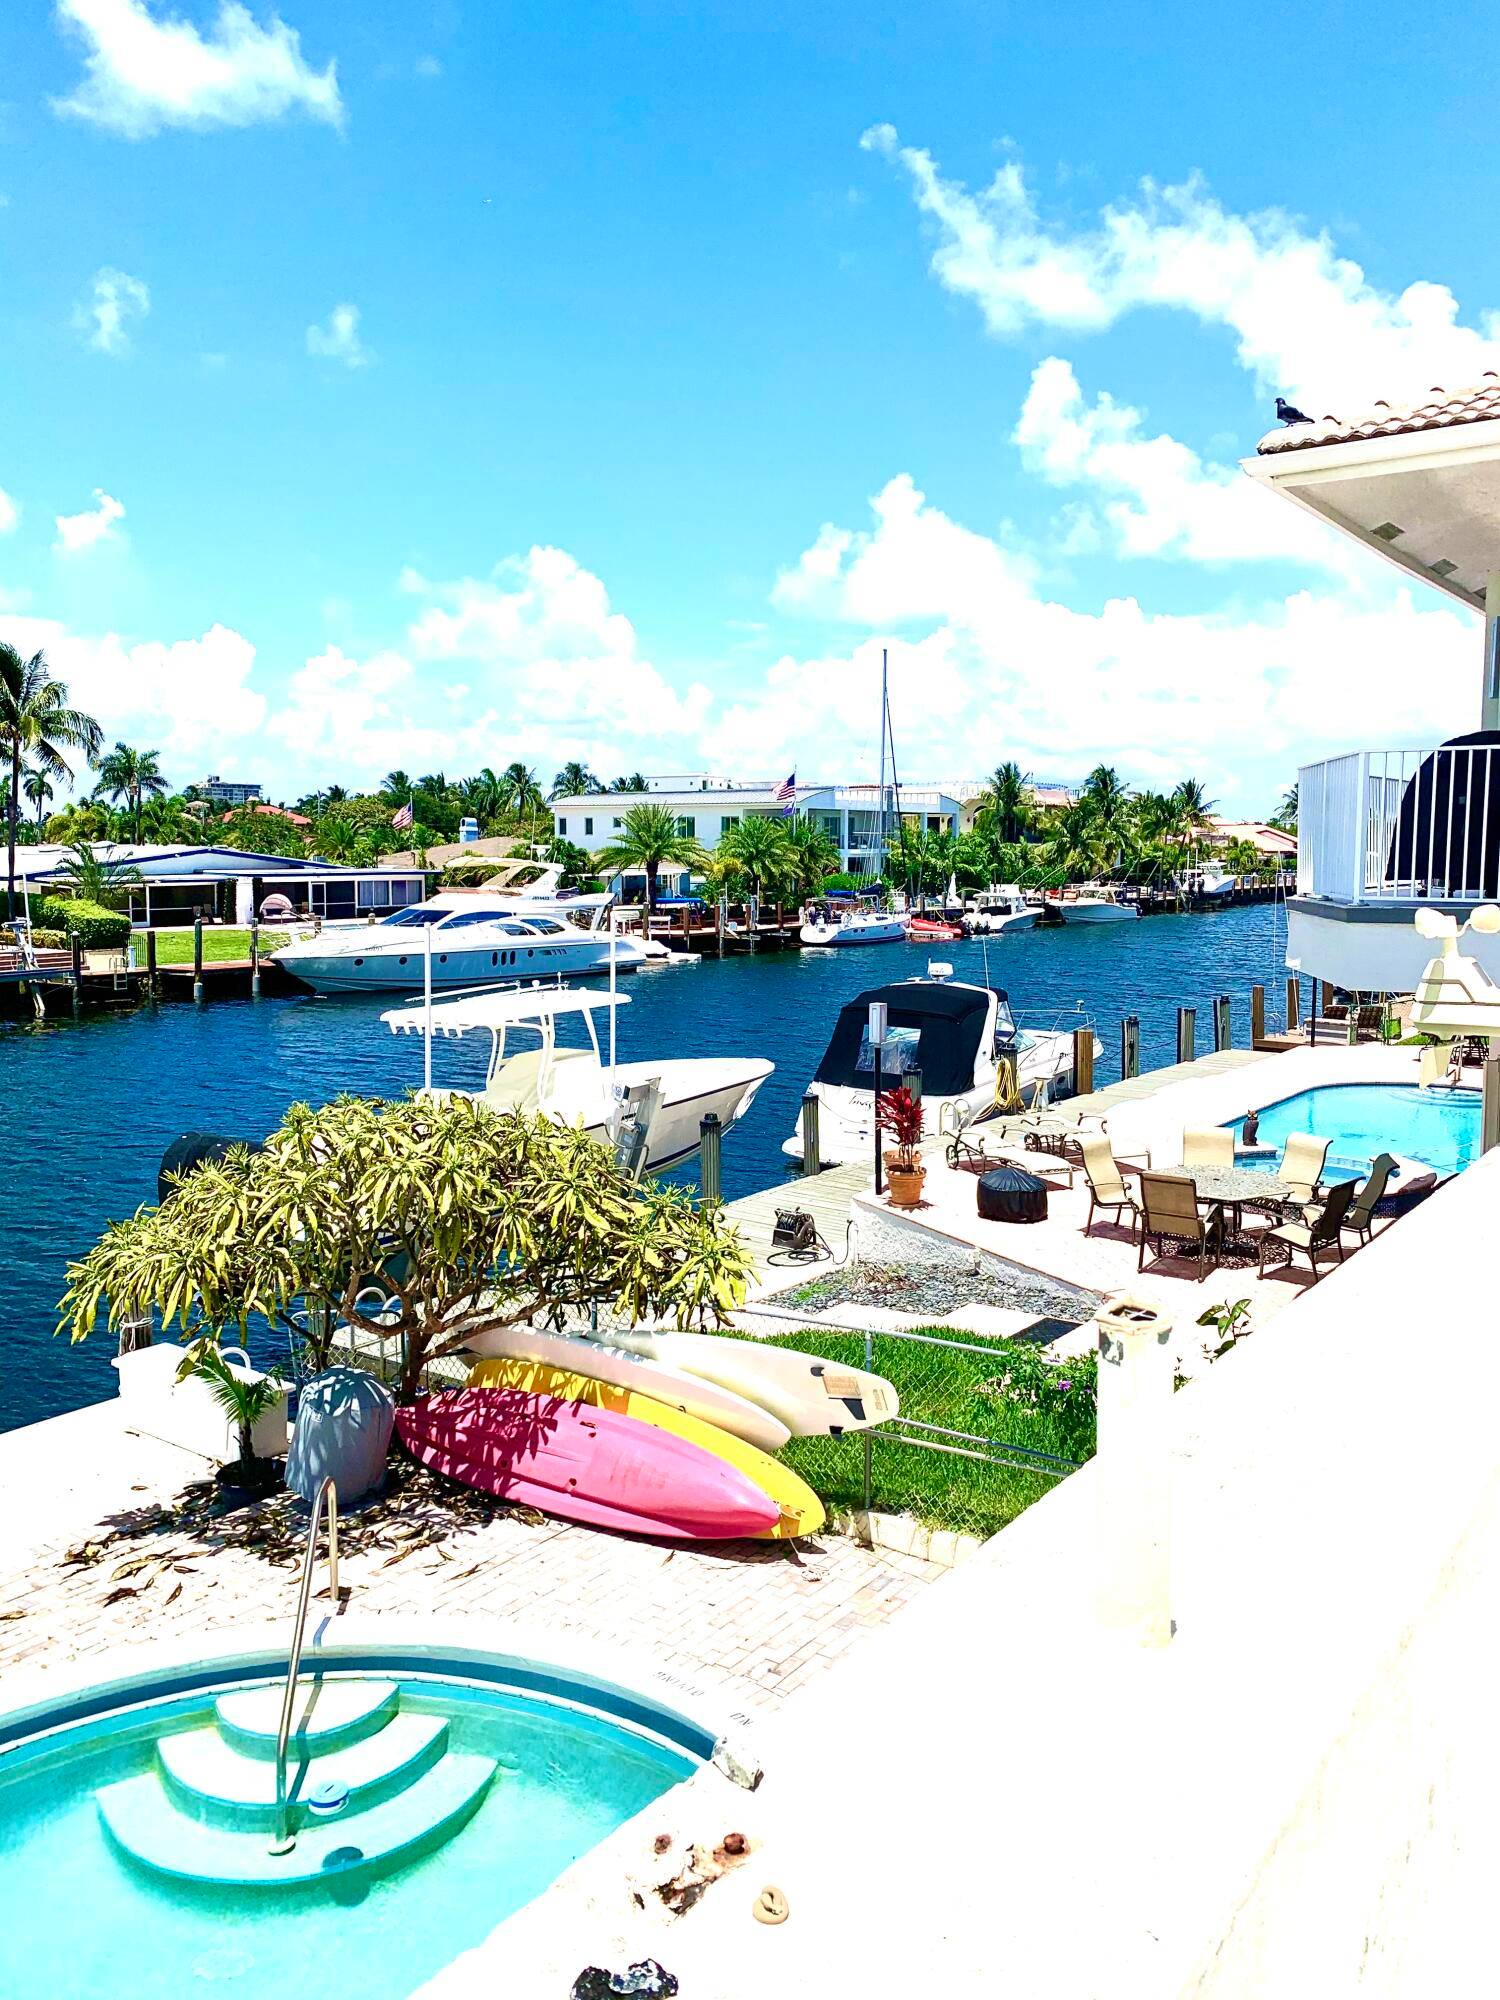 Rarely available Waterfront 5 Unit Building w ocean access in highly desirable Lighthouse Point.